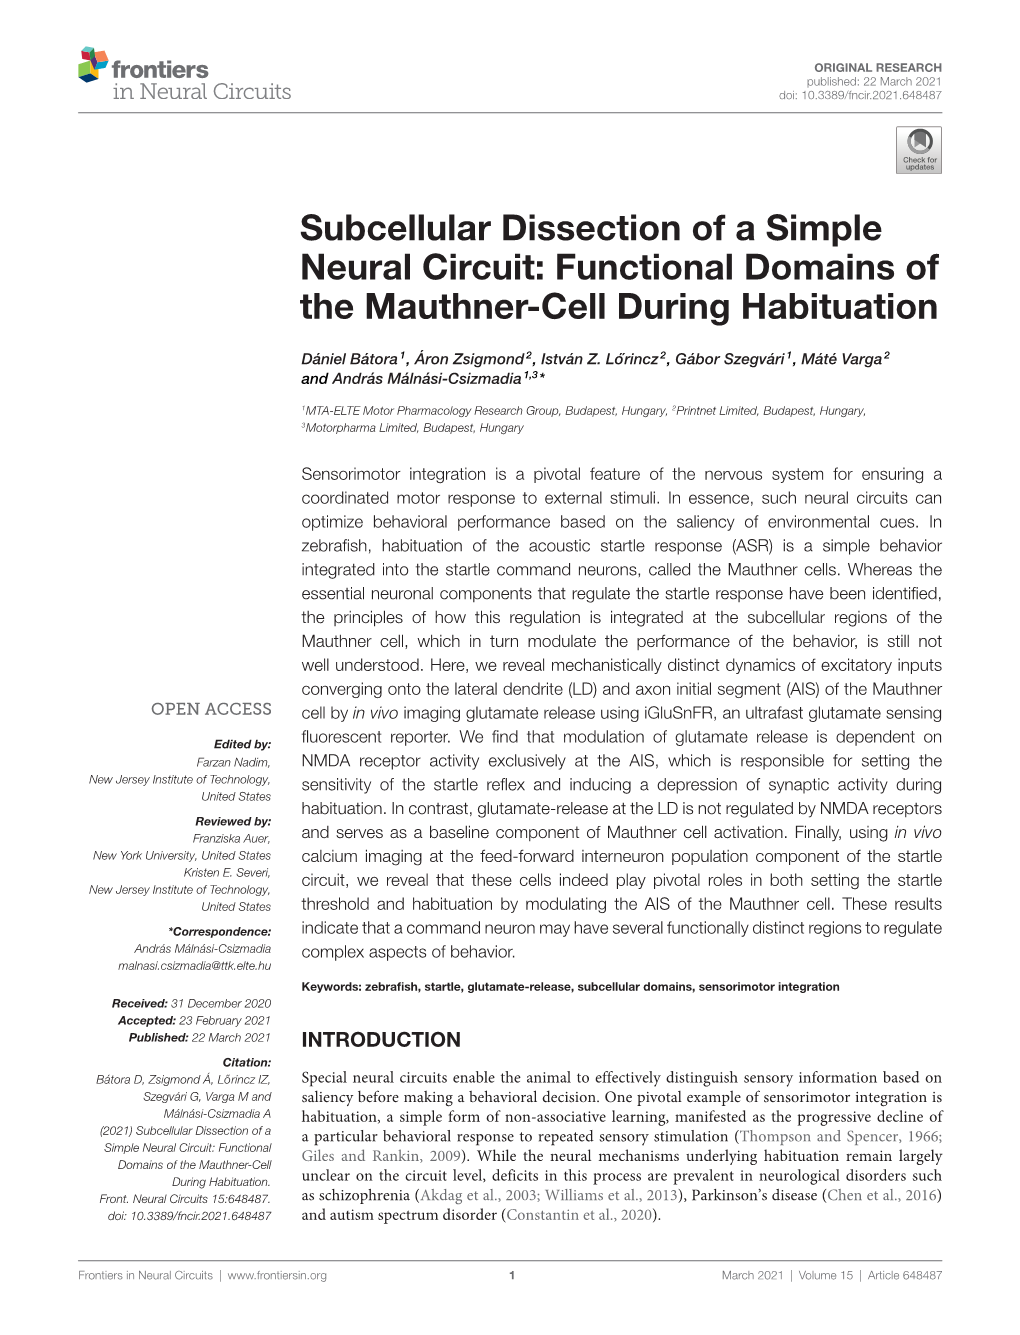 Functional Domains of the Mauthner-Cell During Habituation